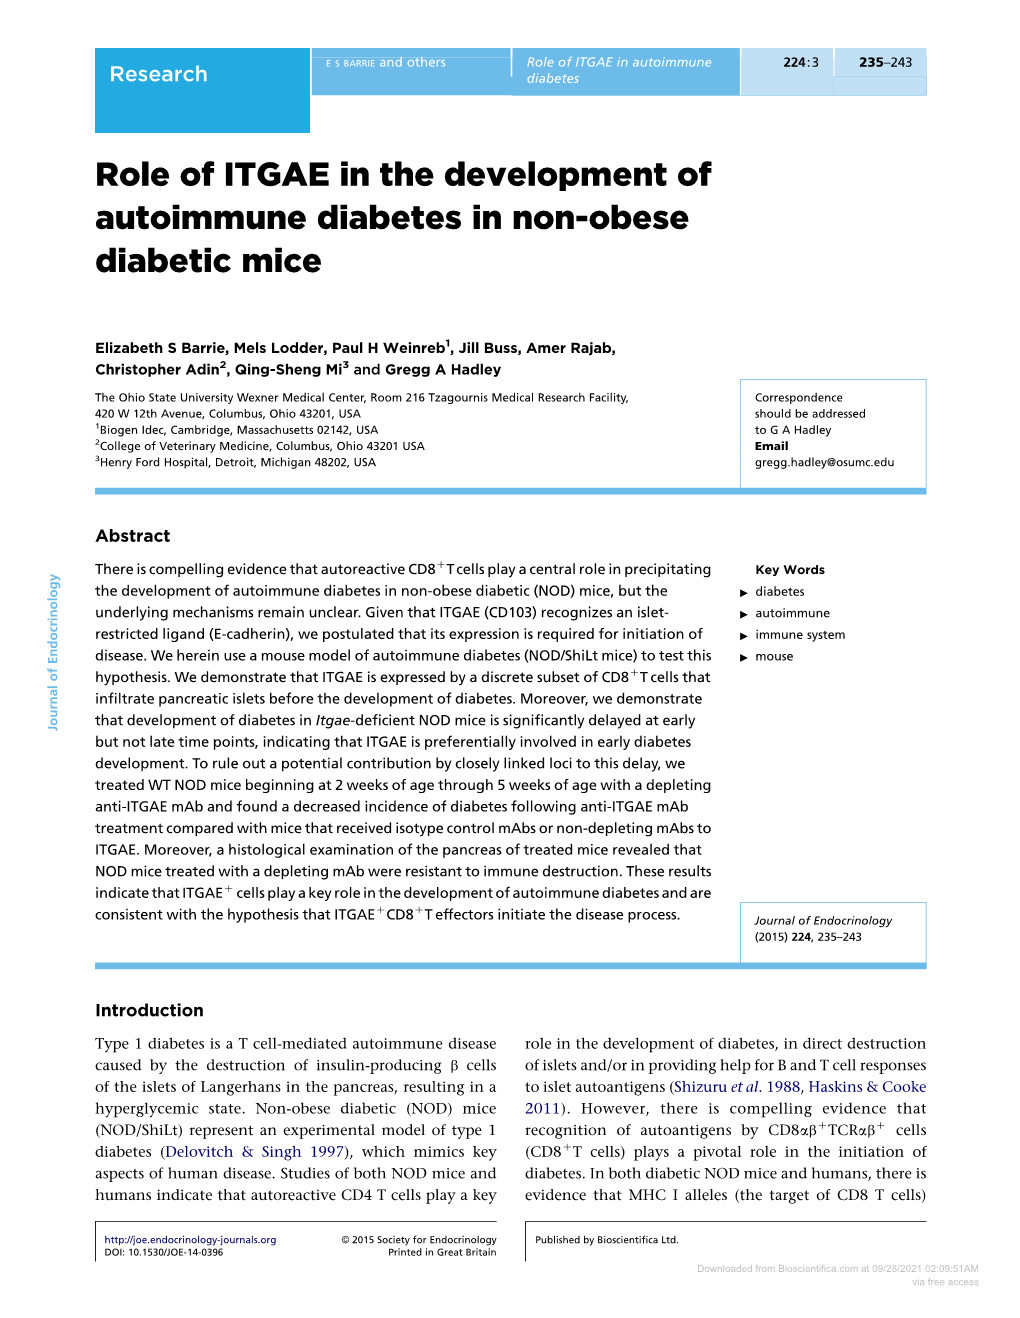 Role of ITGAE in the Development of Autoimmune Diabetes in Non-Obese Diabetic Mice